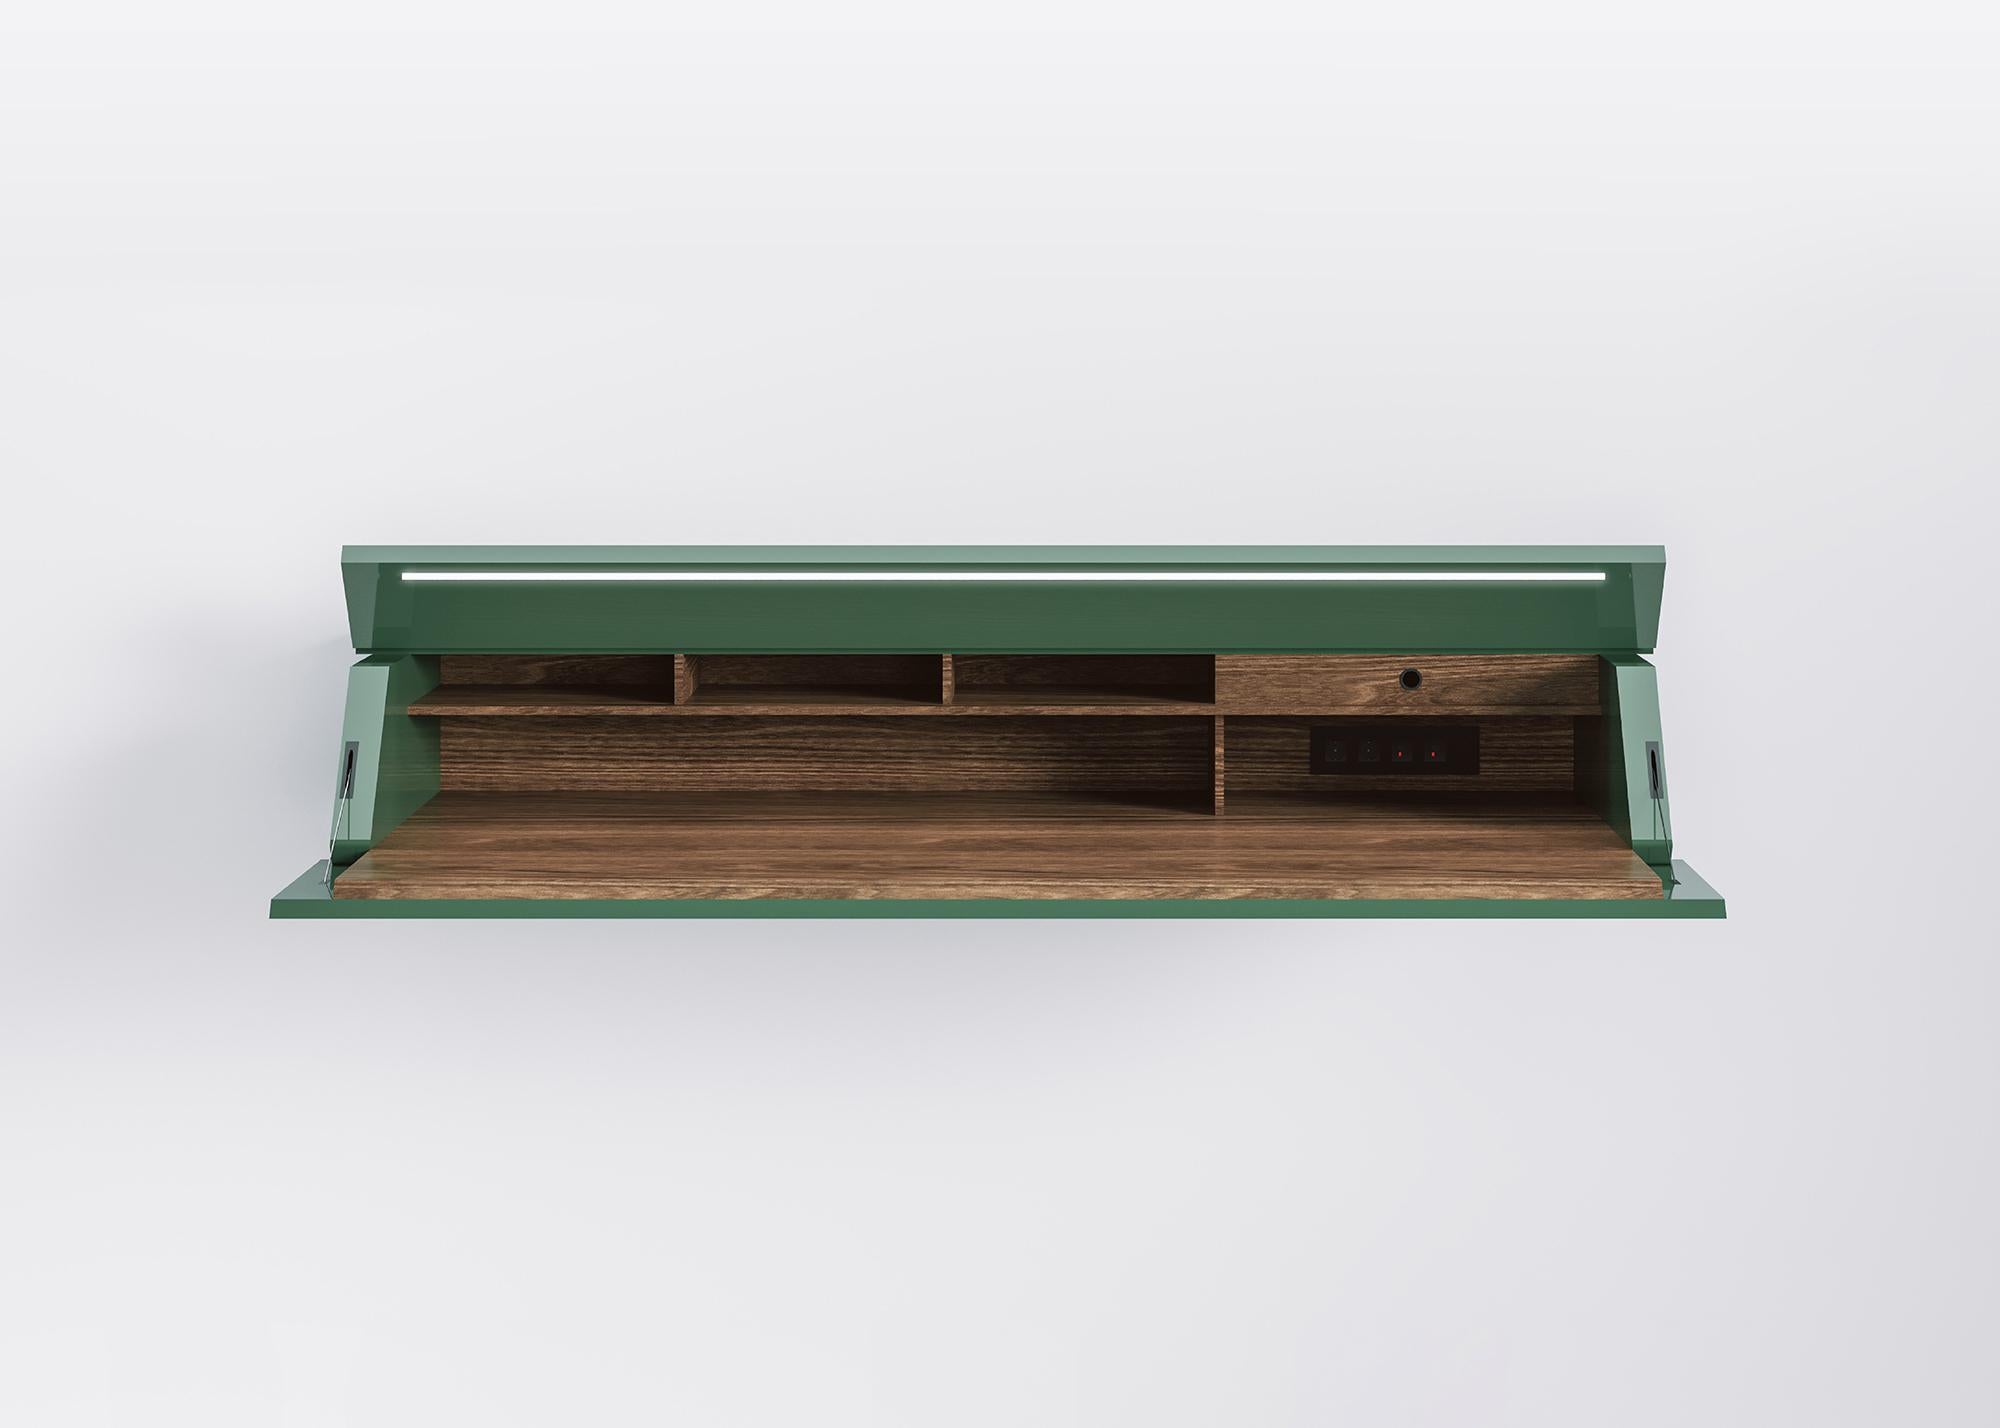 Acerbis Ghostwriter Wall-Mounted Desk/Bookcase in Matt Lacquered Dark Green In New Condition For Sale In Brooklyn, NY